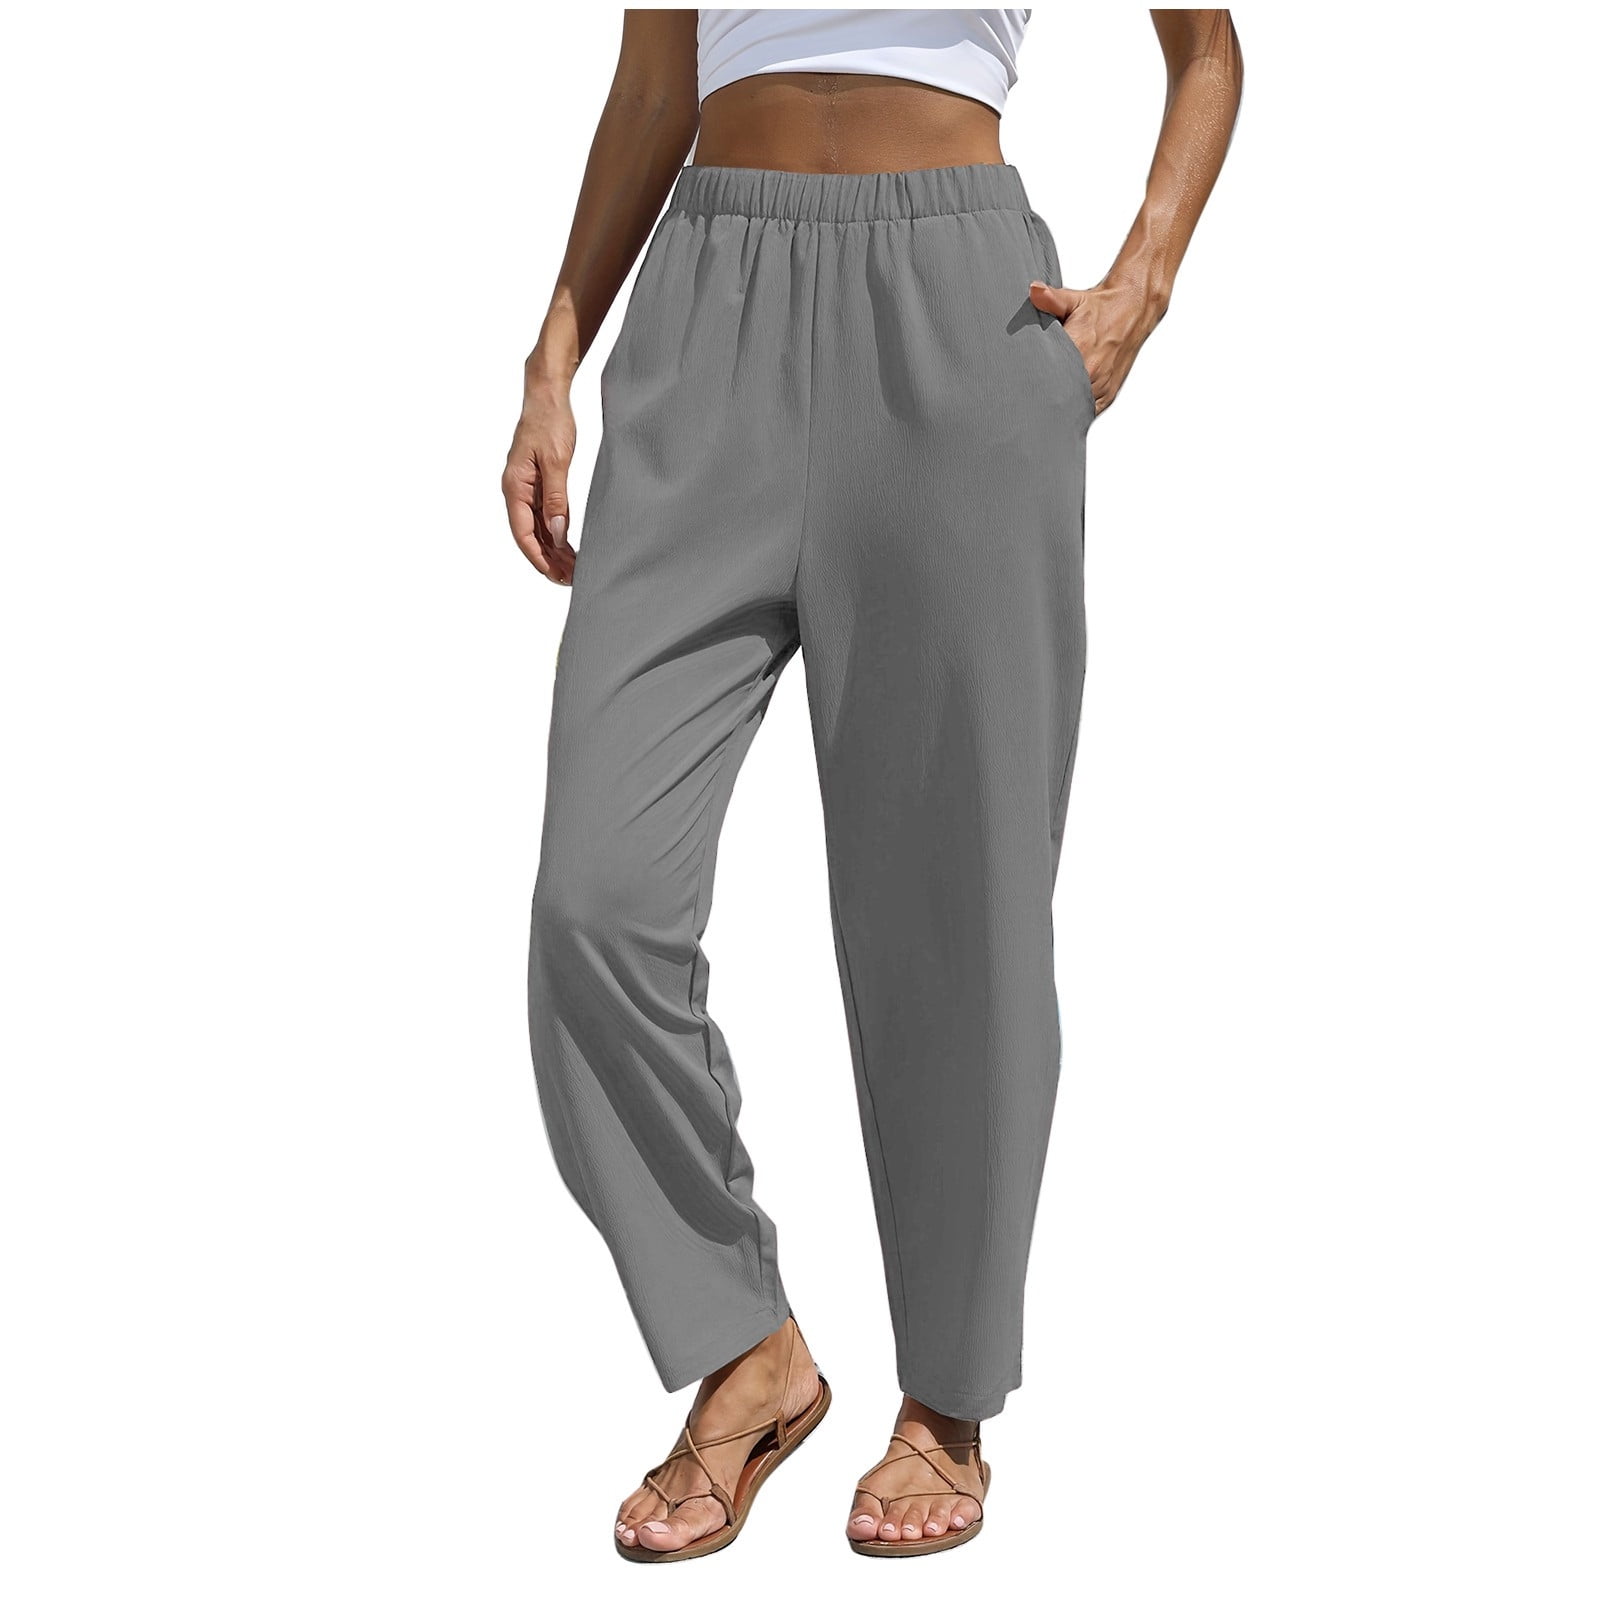 BUIgtTklOP Pants For Women Clearance Women's Solid Color Elastic